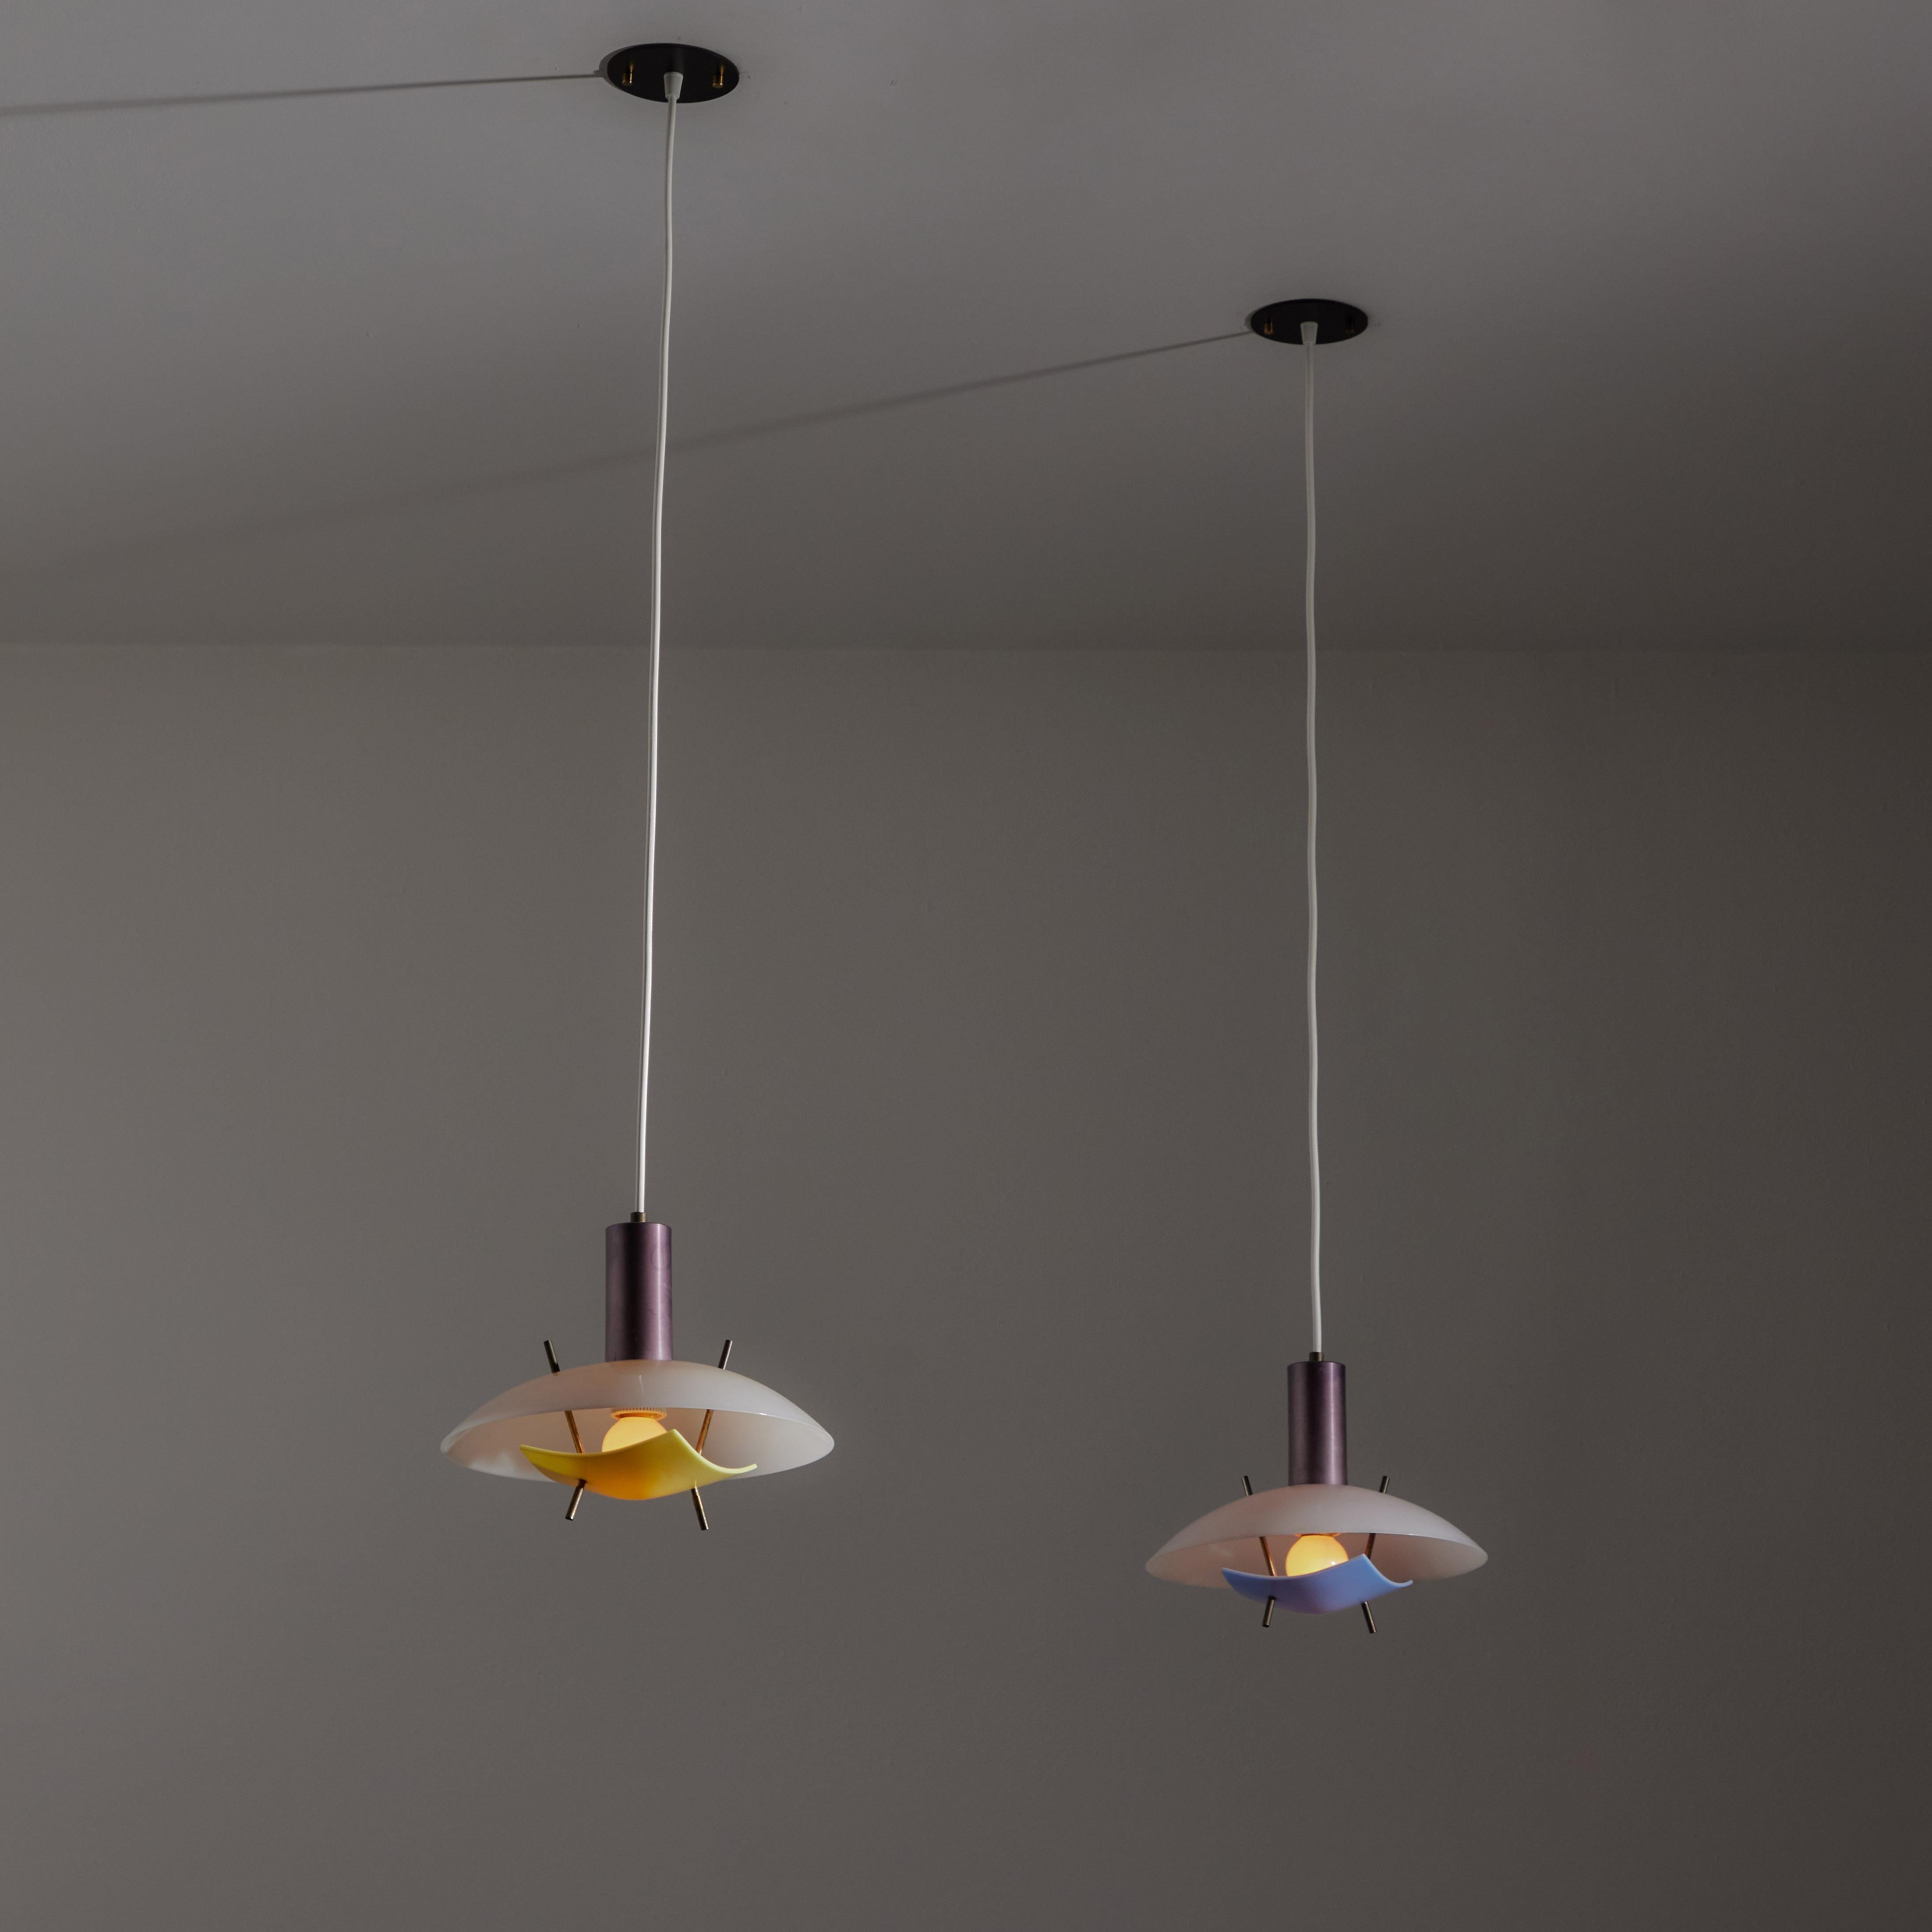 Pendants by Arredoluce. Designed and manufactured in Italy, circa the 1960s. White acrylic upper shade, paired with a colored acrylic diffuser at the bottom. Burnished and patinated brass details. Each pendant holds a singel E27 socket type, adapted